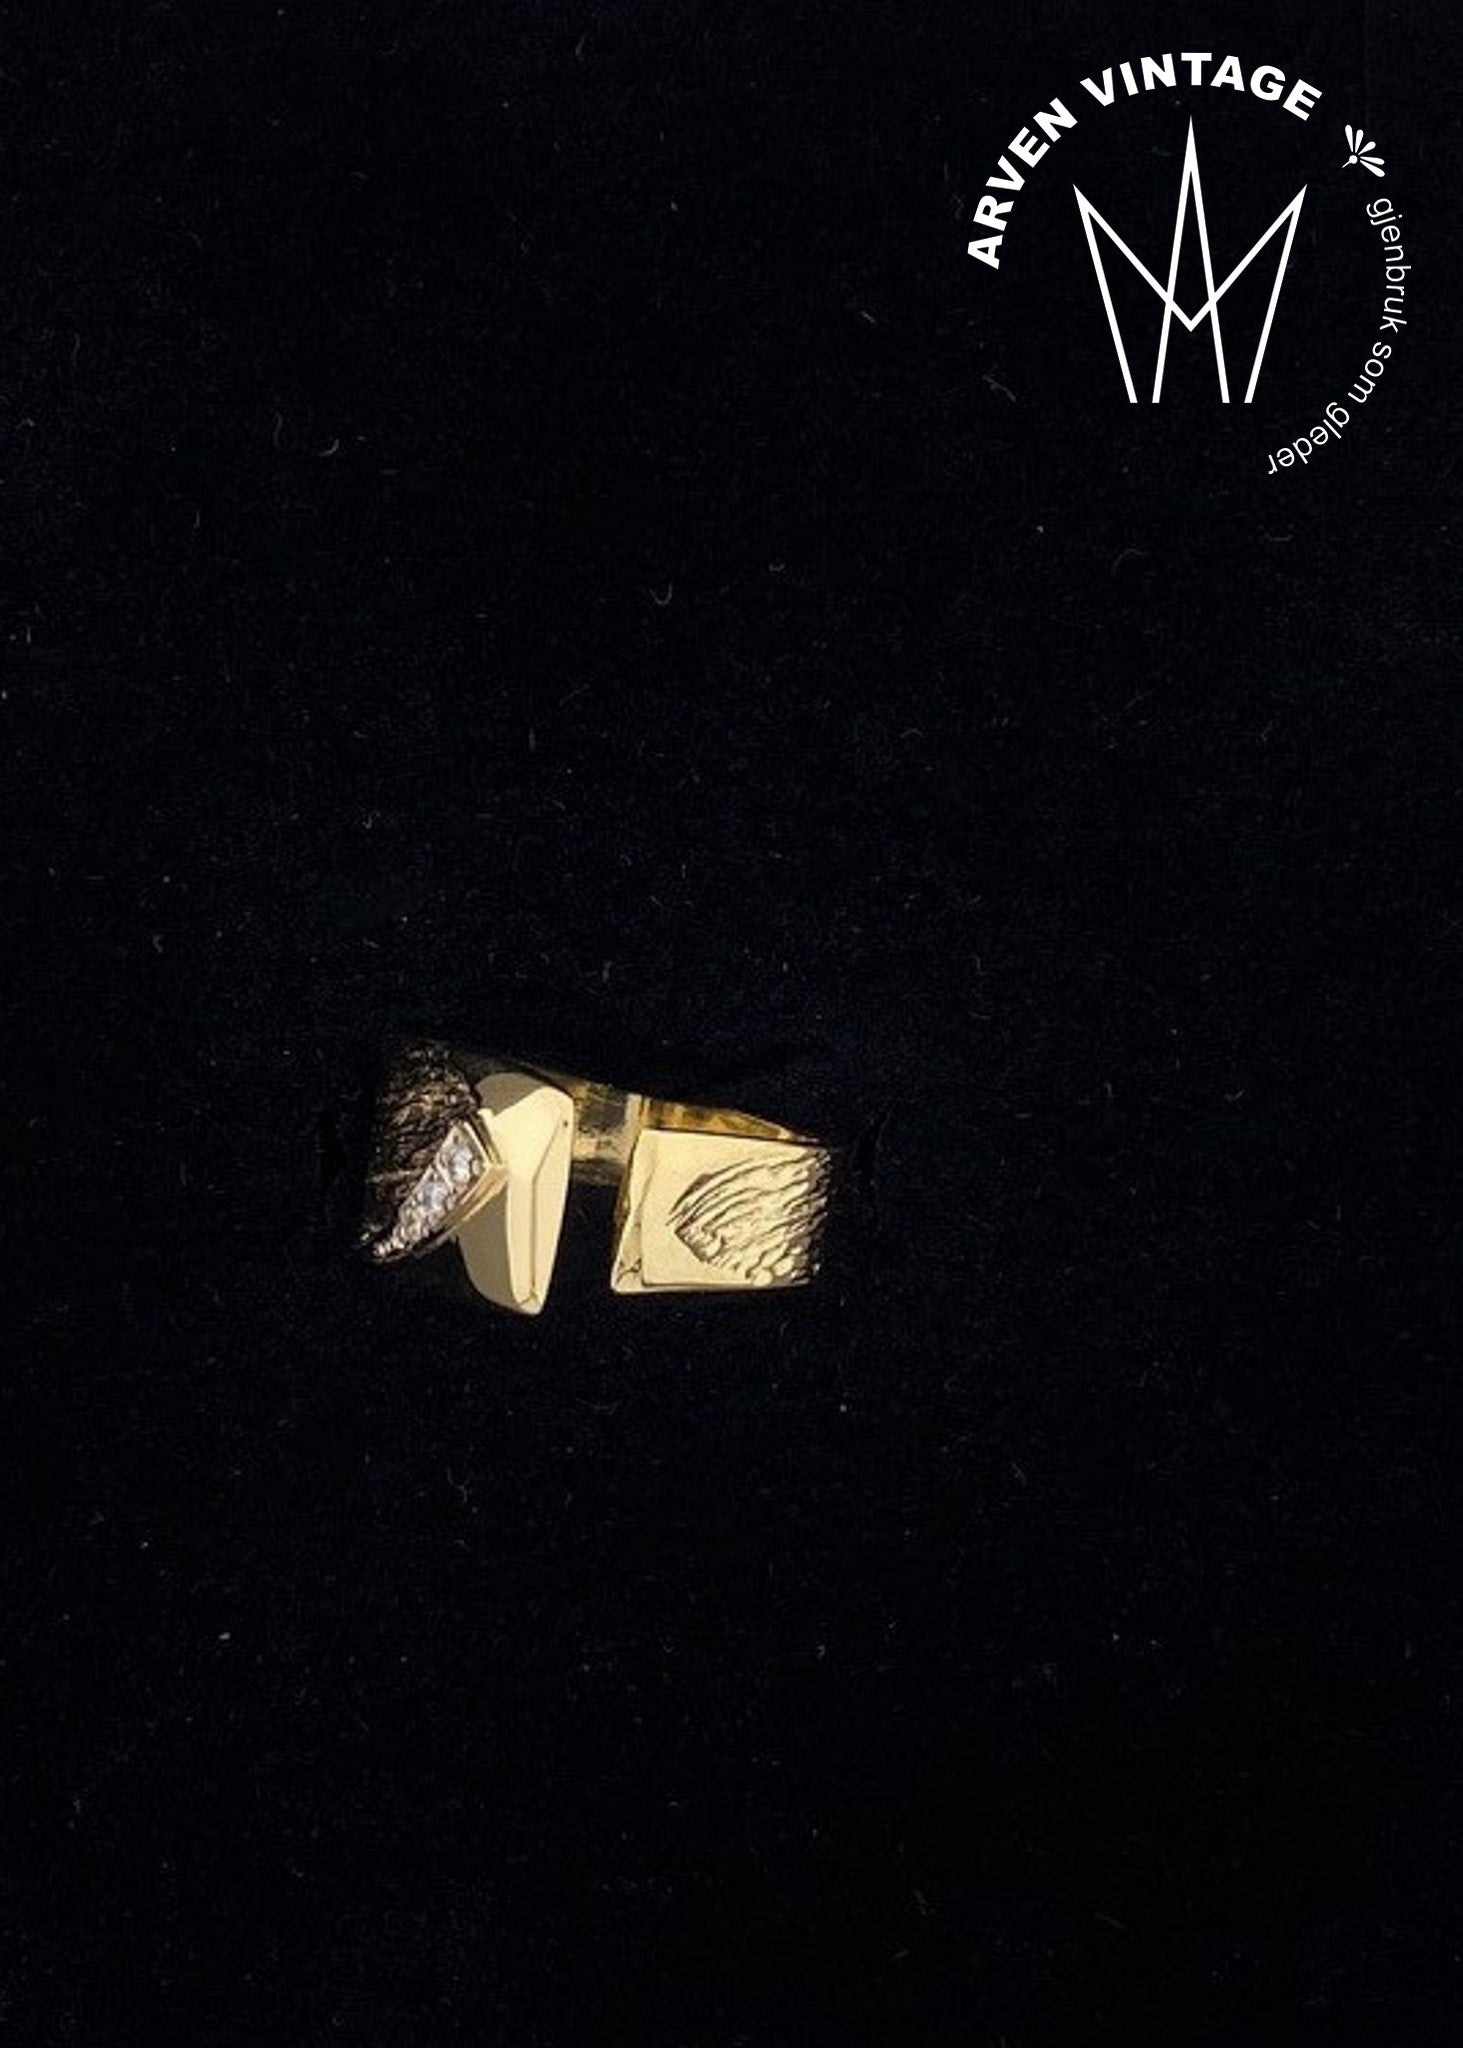 Vintage gold ring with diamonds